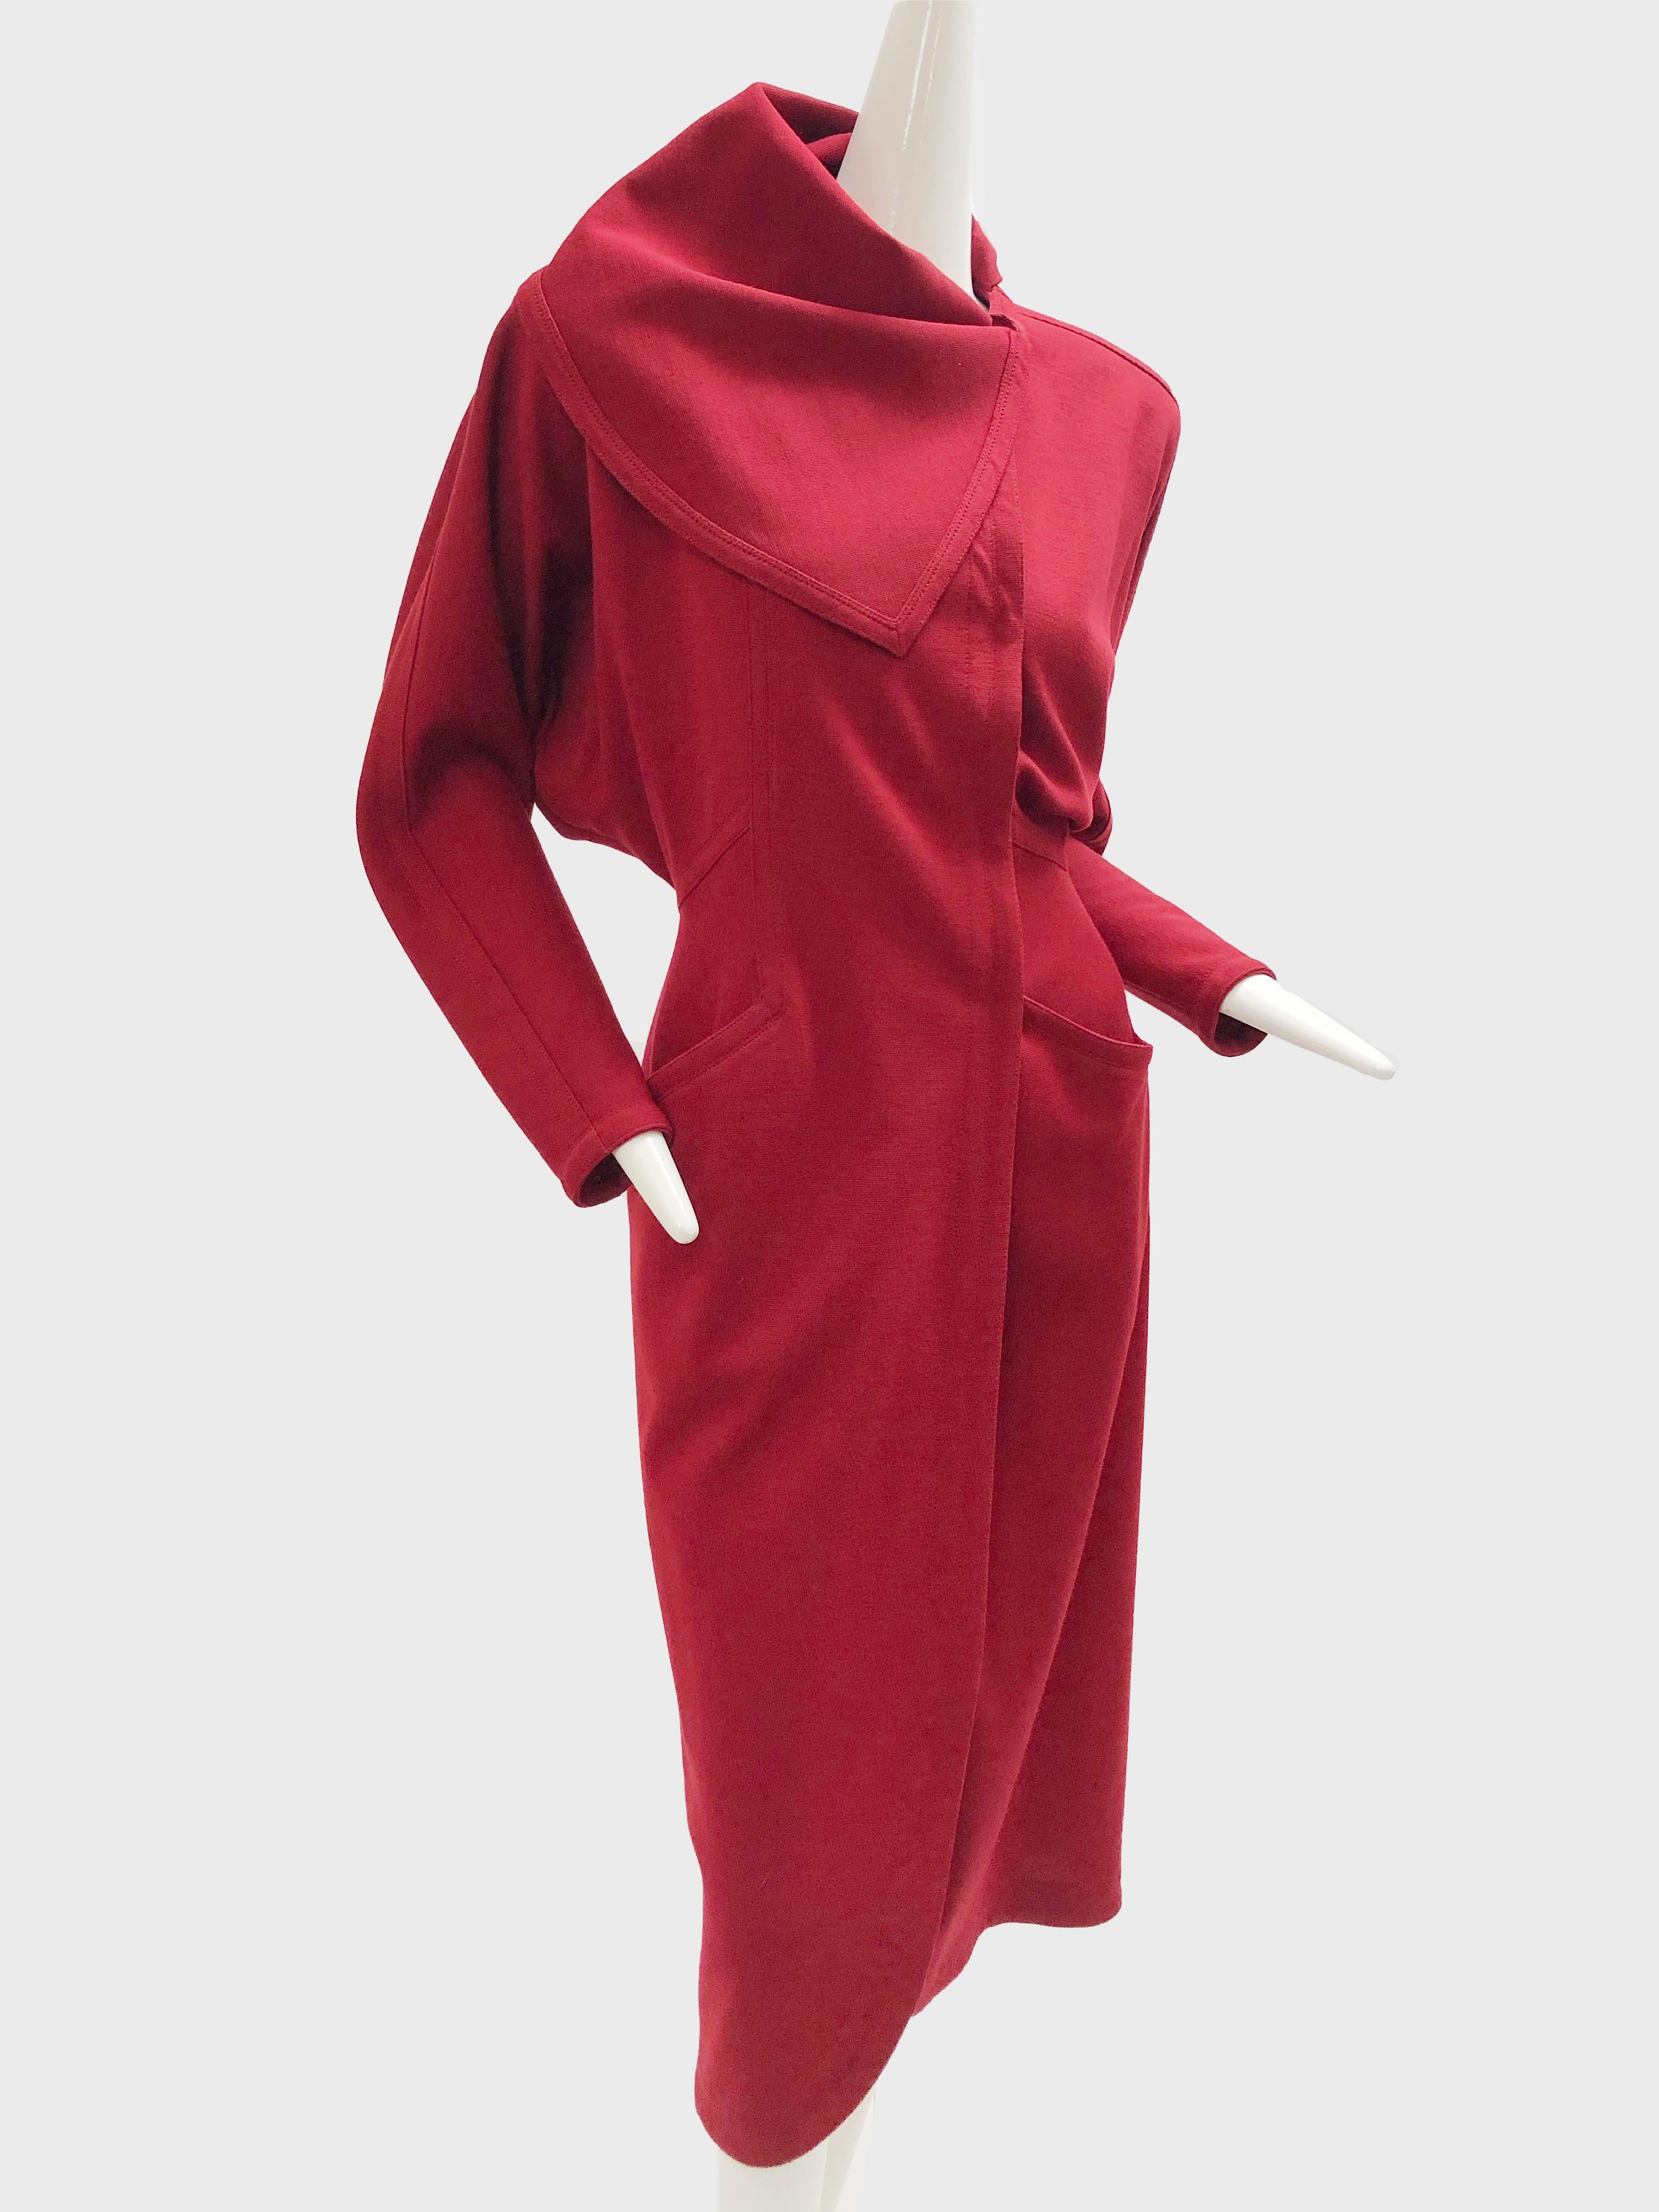 A beautiful 1980s Gianni Versace red wool jersey, wrap-style coat dress with dolman sleeves, hidden buttons at front and an attached foulard. Will fit approximately a US size 0-4.